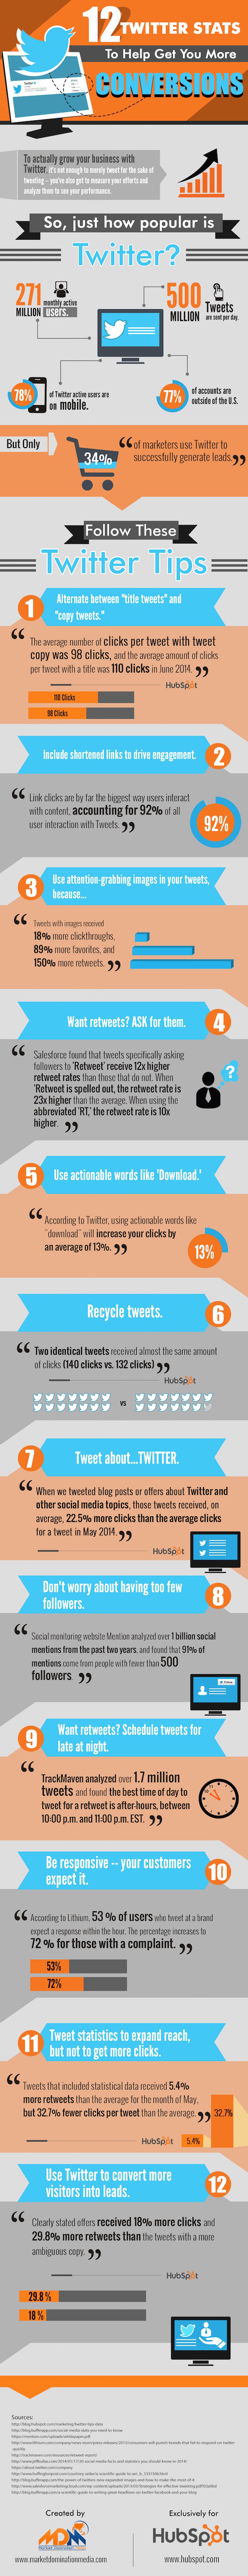 Get More Conversions Using These 12 Twitter Stats [Infographic]